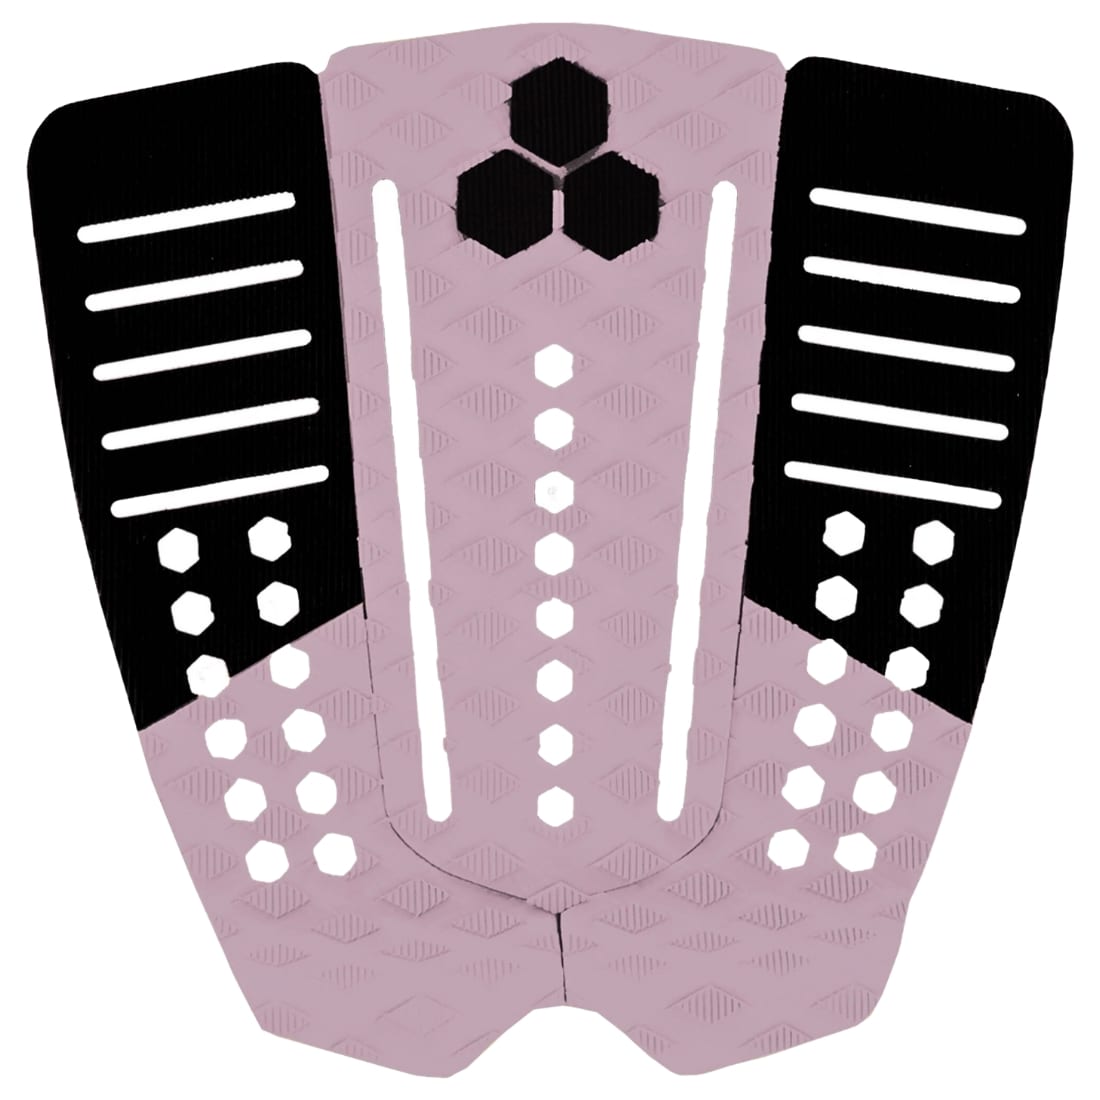 Channel Islands 50/50 Arch 3 Piece Tail Pad - Black/Pink - 3 Piece Tail Pad by Channel Islands